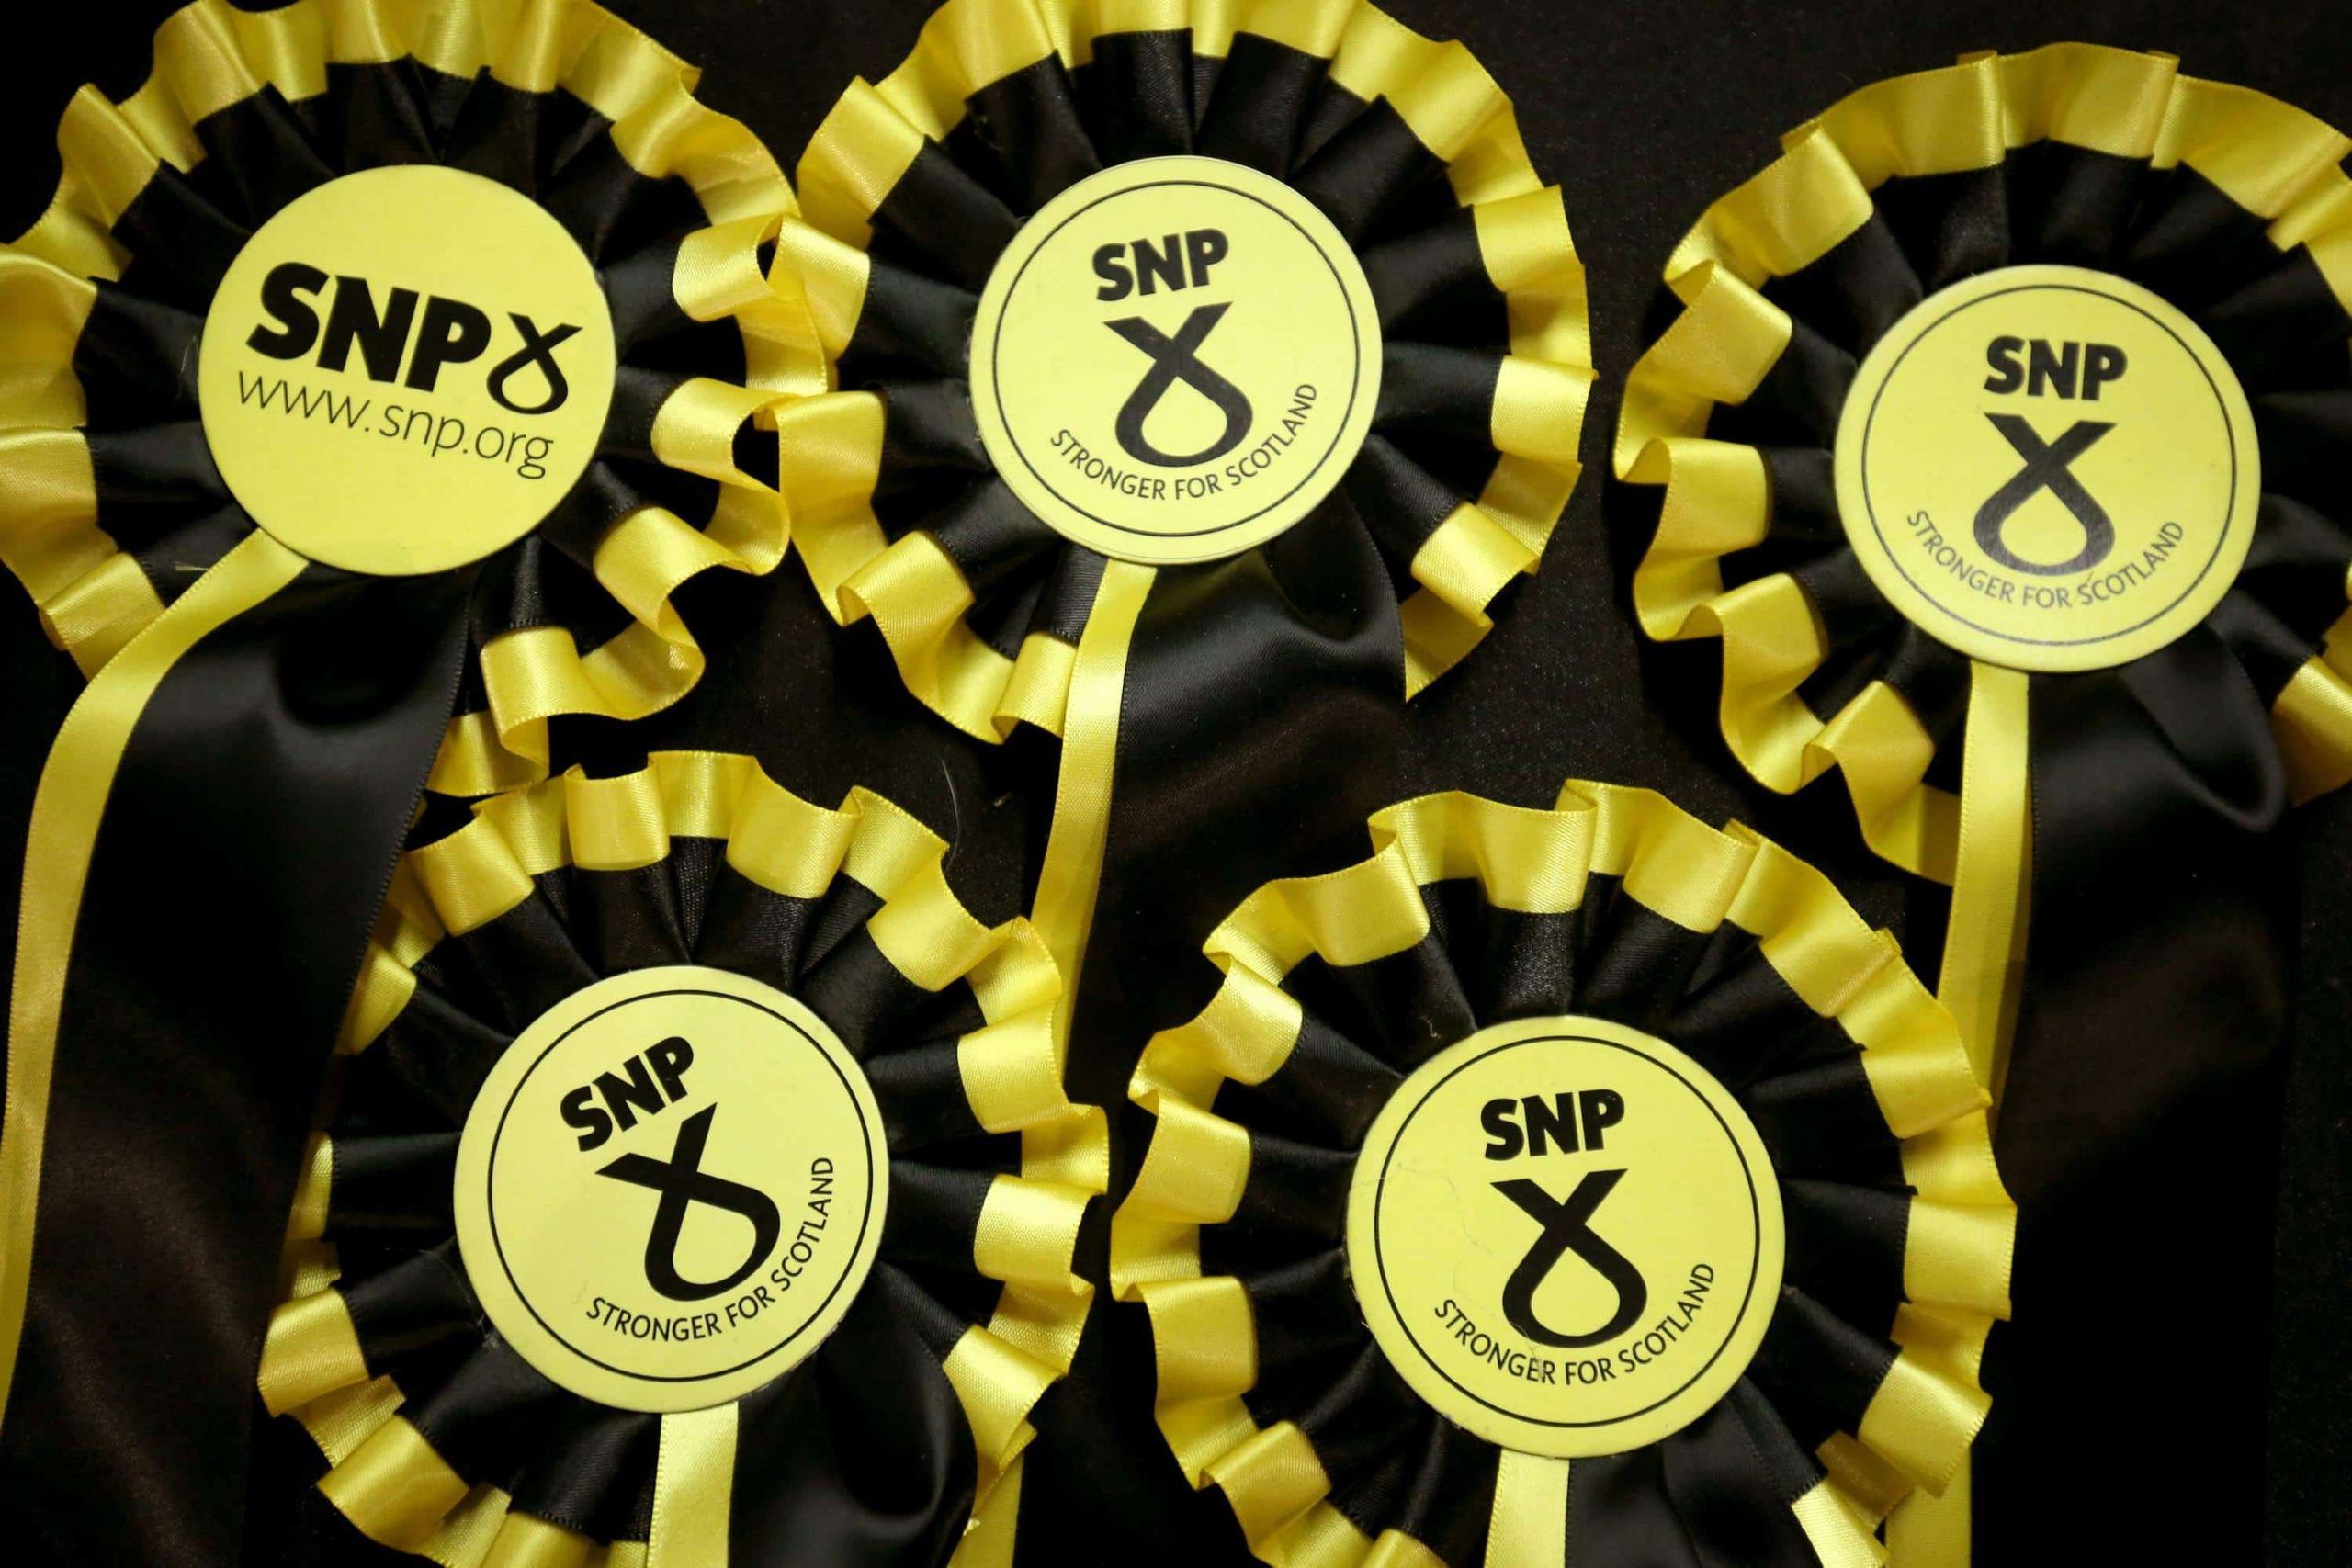 SNP candidate slams anti-Semitism after leaflet defaced with Nazi symbols